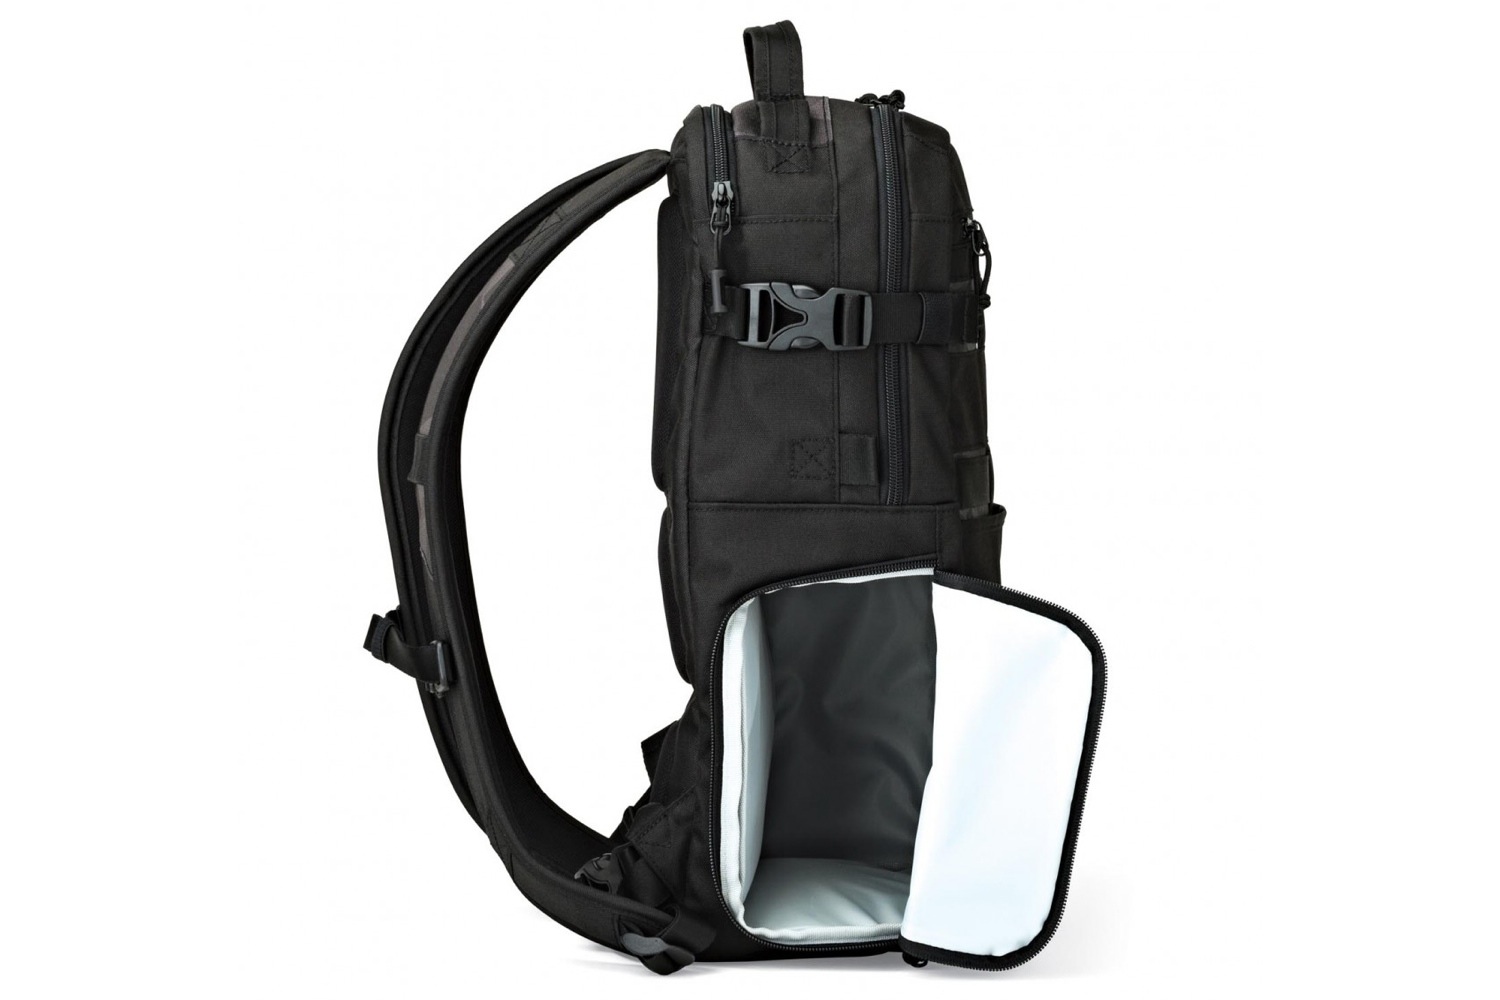 lowepro launches viewpoint bags designed to haul your action camera gear bp250 1